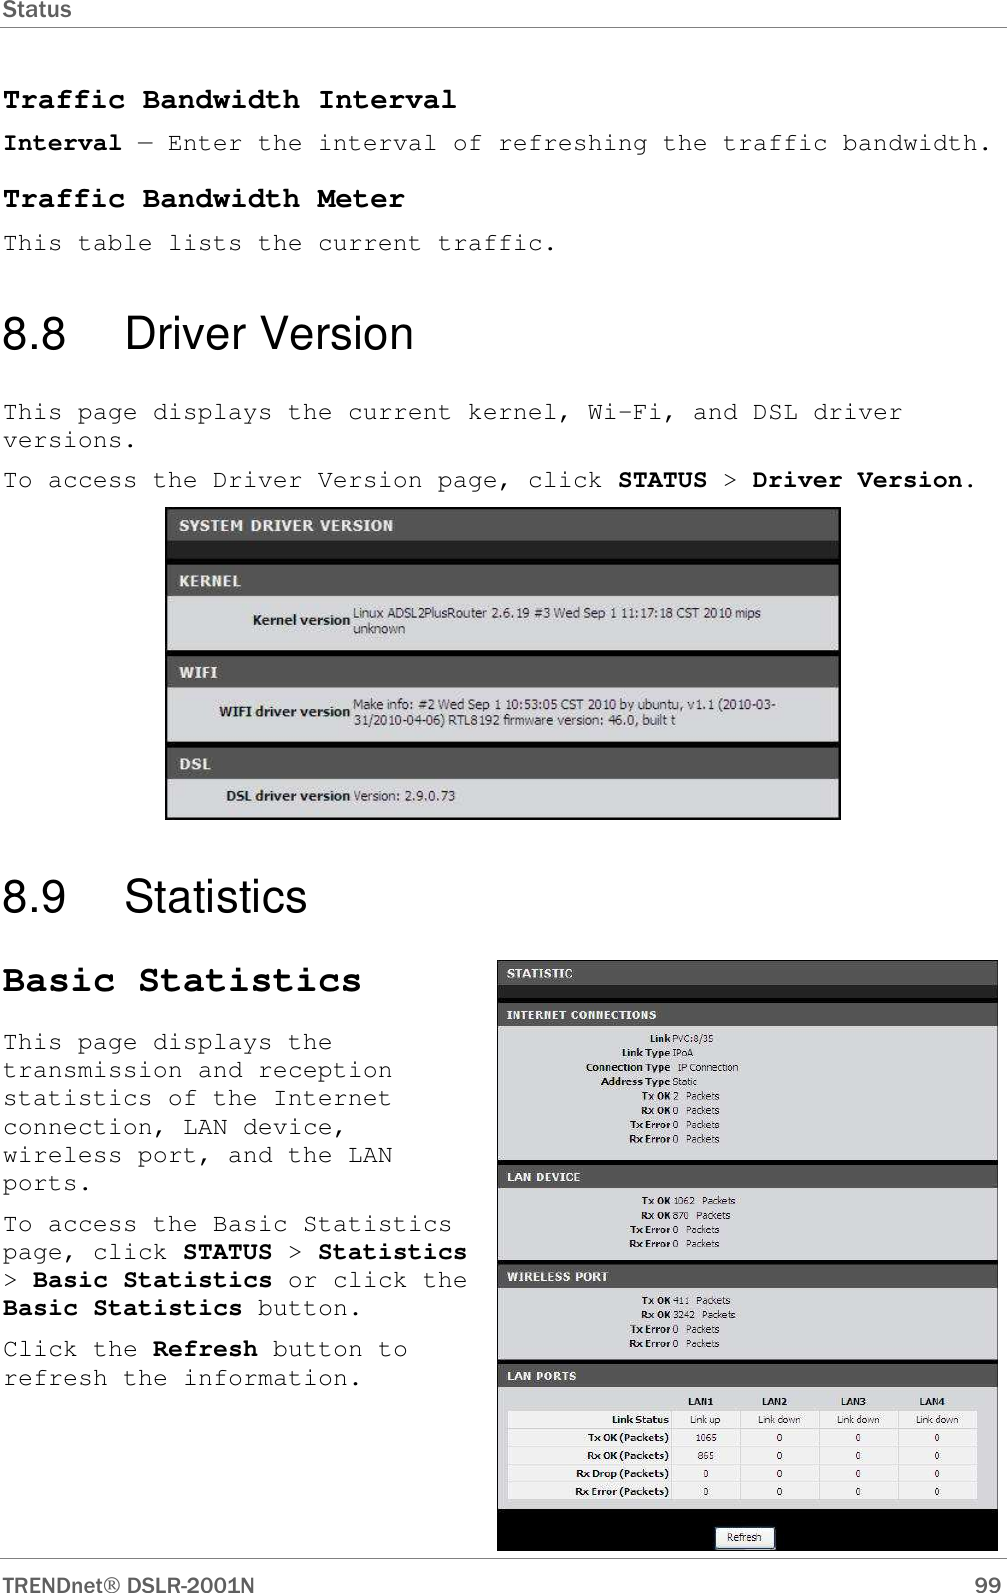 Status      TRENDnet DSLR-2001N        99 Traffic Bandwidth Interval Interval — Enter the interval of refreshing the traffic bandwidth. Traffic Bandwidth Meter This table lists the current traffic. 8.8  Driver Version This page displays the current kernel, Wi-Fi, and DSL driver versions. To access the Driver Version page, click STATUS &gt; Driver Version.  8.9  Statistics Basic Statistics This page displays the transmission and reception statistics of the Internet connection, LAN device, wireless port, and the LAN ports. To access the Basic Statistics page, click STATUS &gt; Statistics &gt; Basic Statistics or click the Basic Statistics button. Click the Refresh button to refresh the information. 